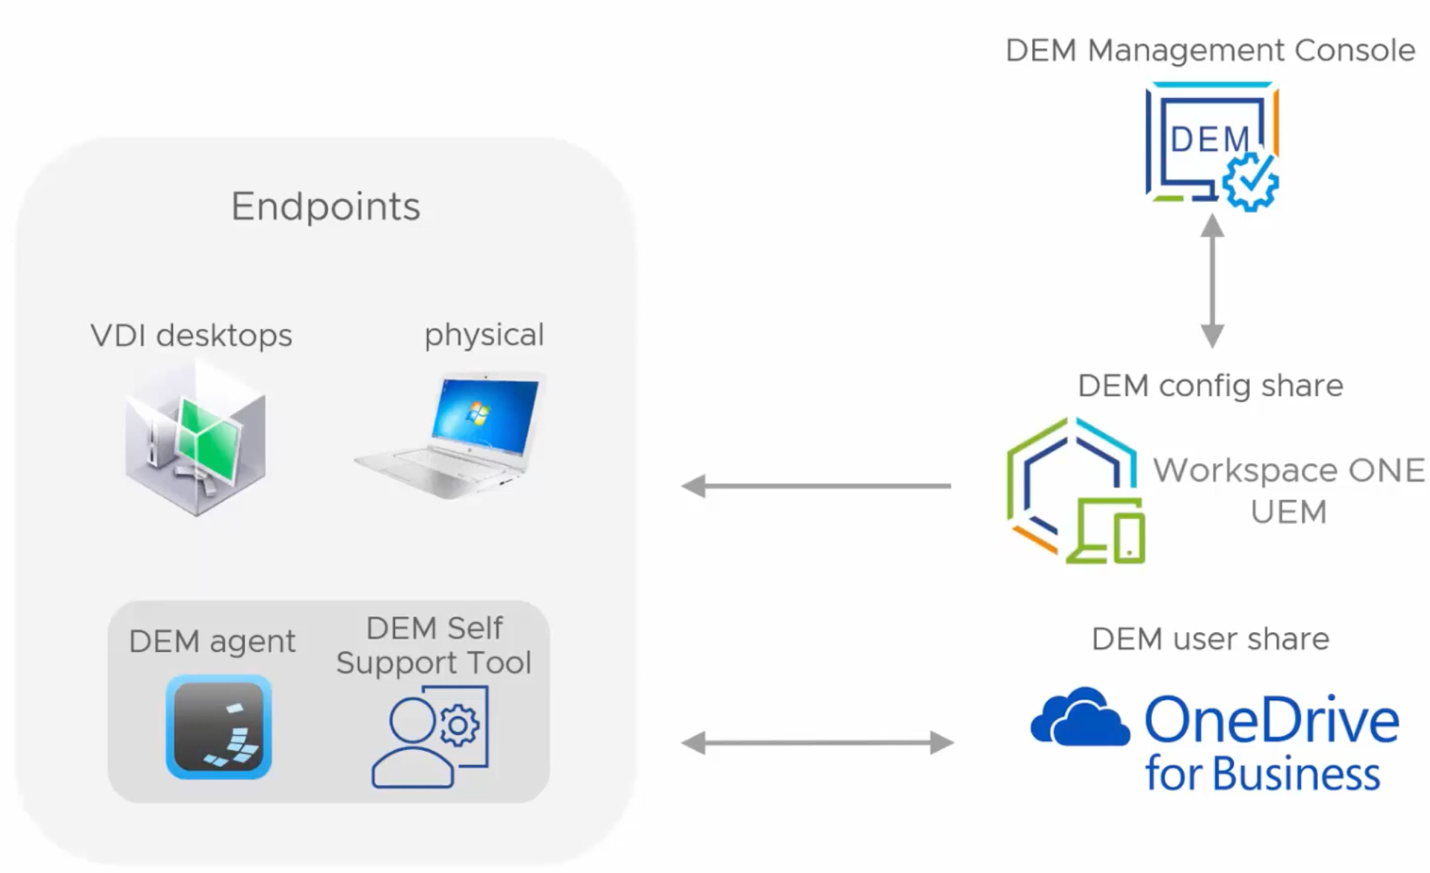 Storing users’ profiles with Microsoft OneDrive for Business